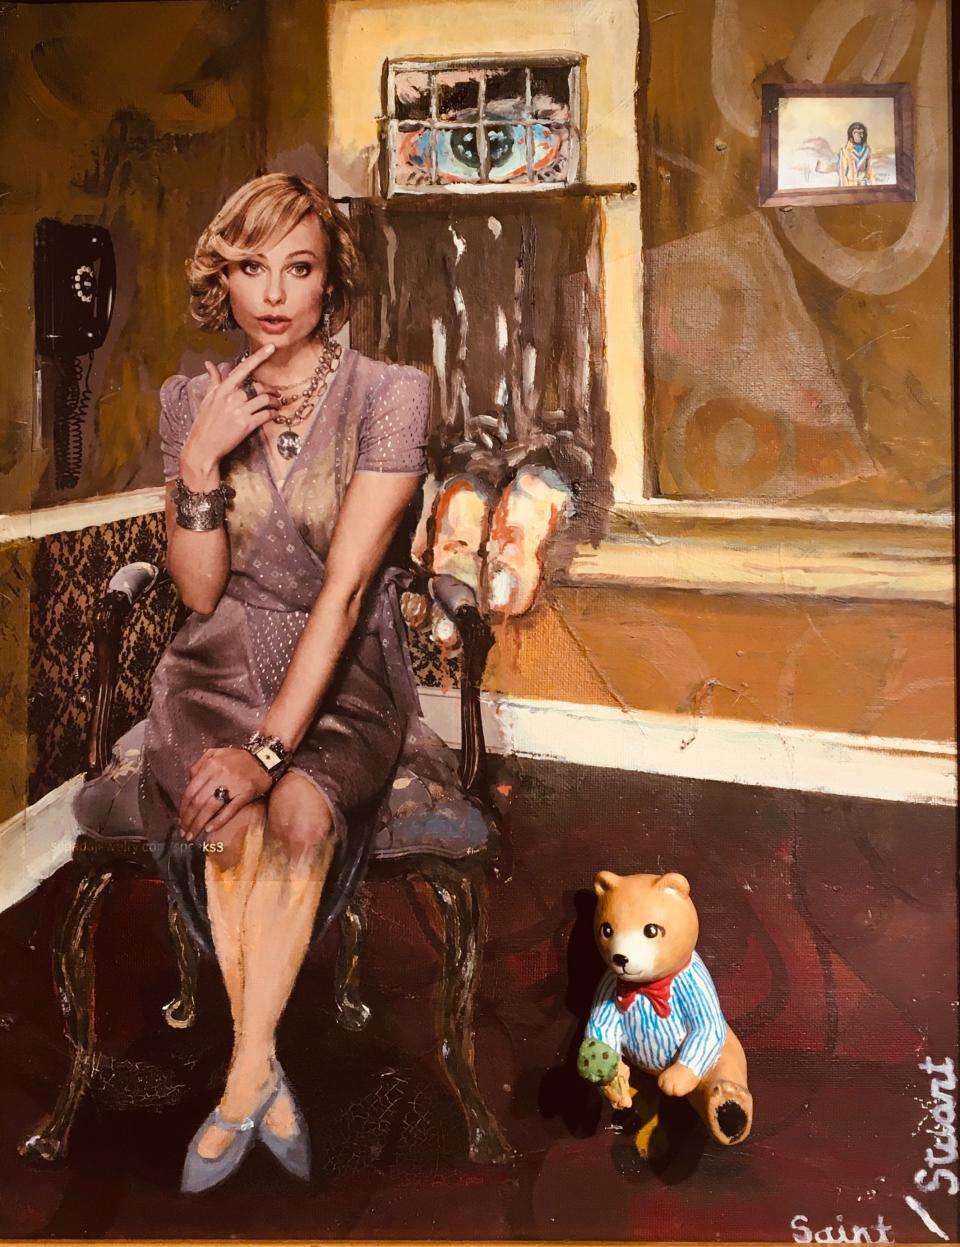 Untitled (blonde and bear), by Stuart Powers.